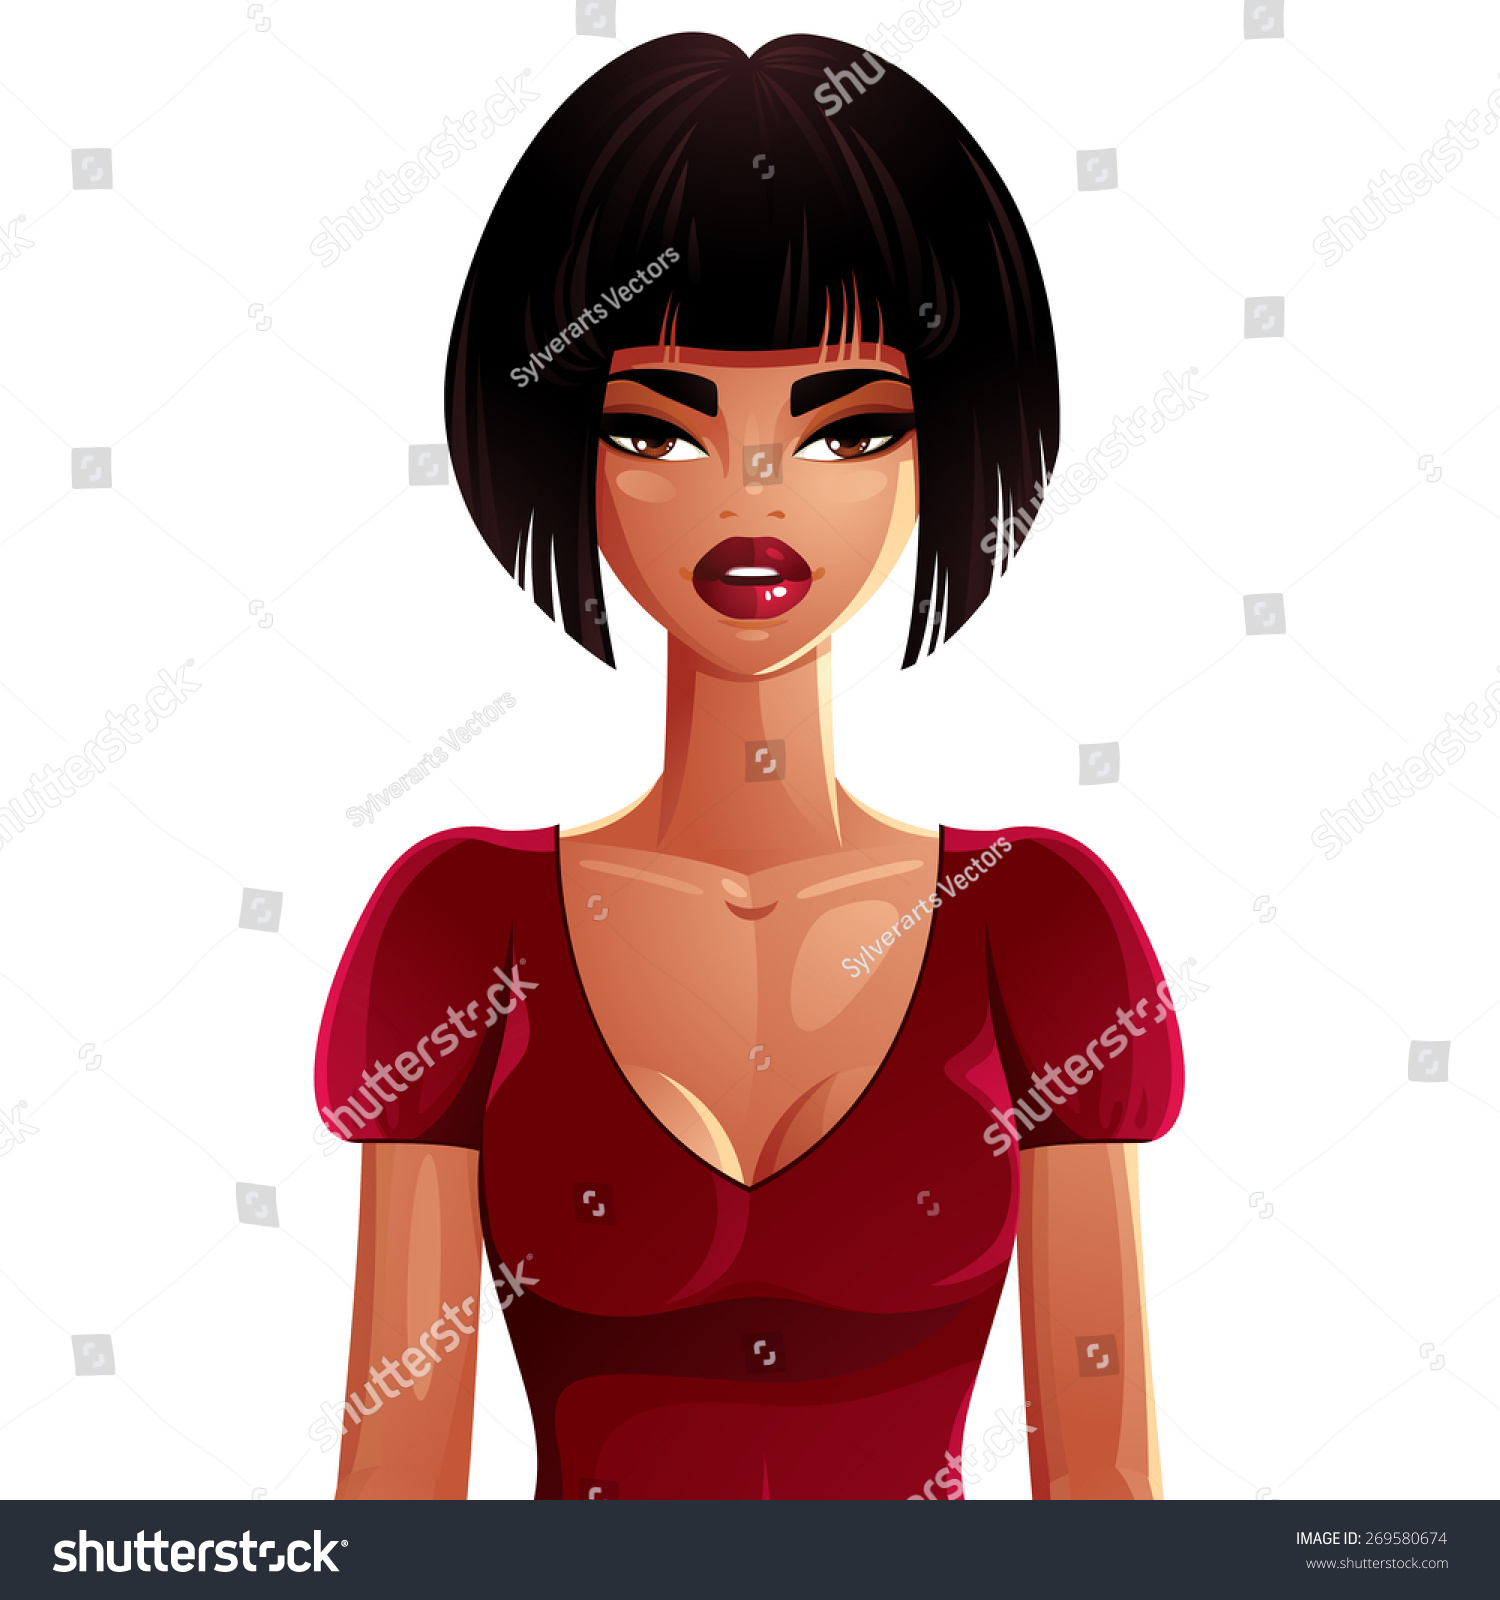 Beautiful Coquette Lady Illustration Upper Body Stock Vector Royalty Free 269580674 Shutterstock 